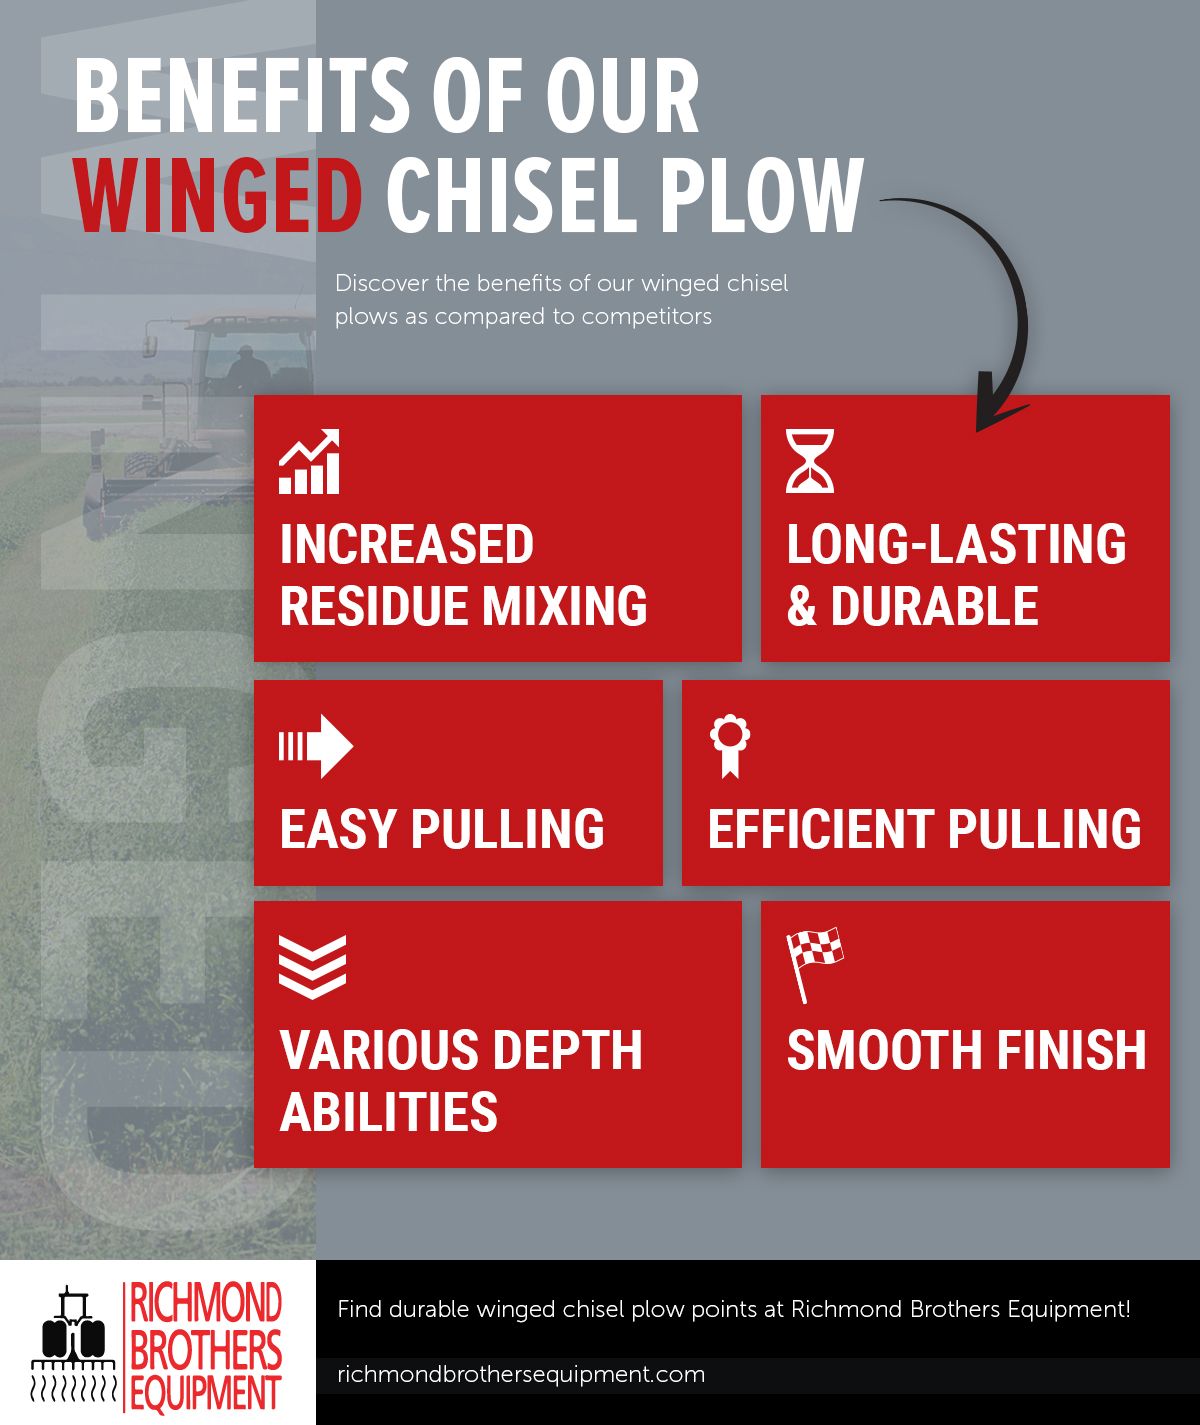 2021-07-23_infographic_Benefits-of-Our-Winged-Chisel-Plow.jpg